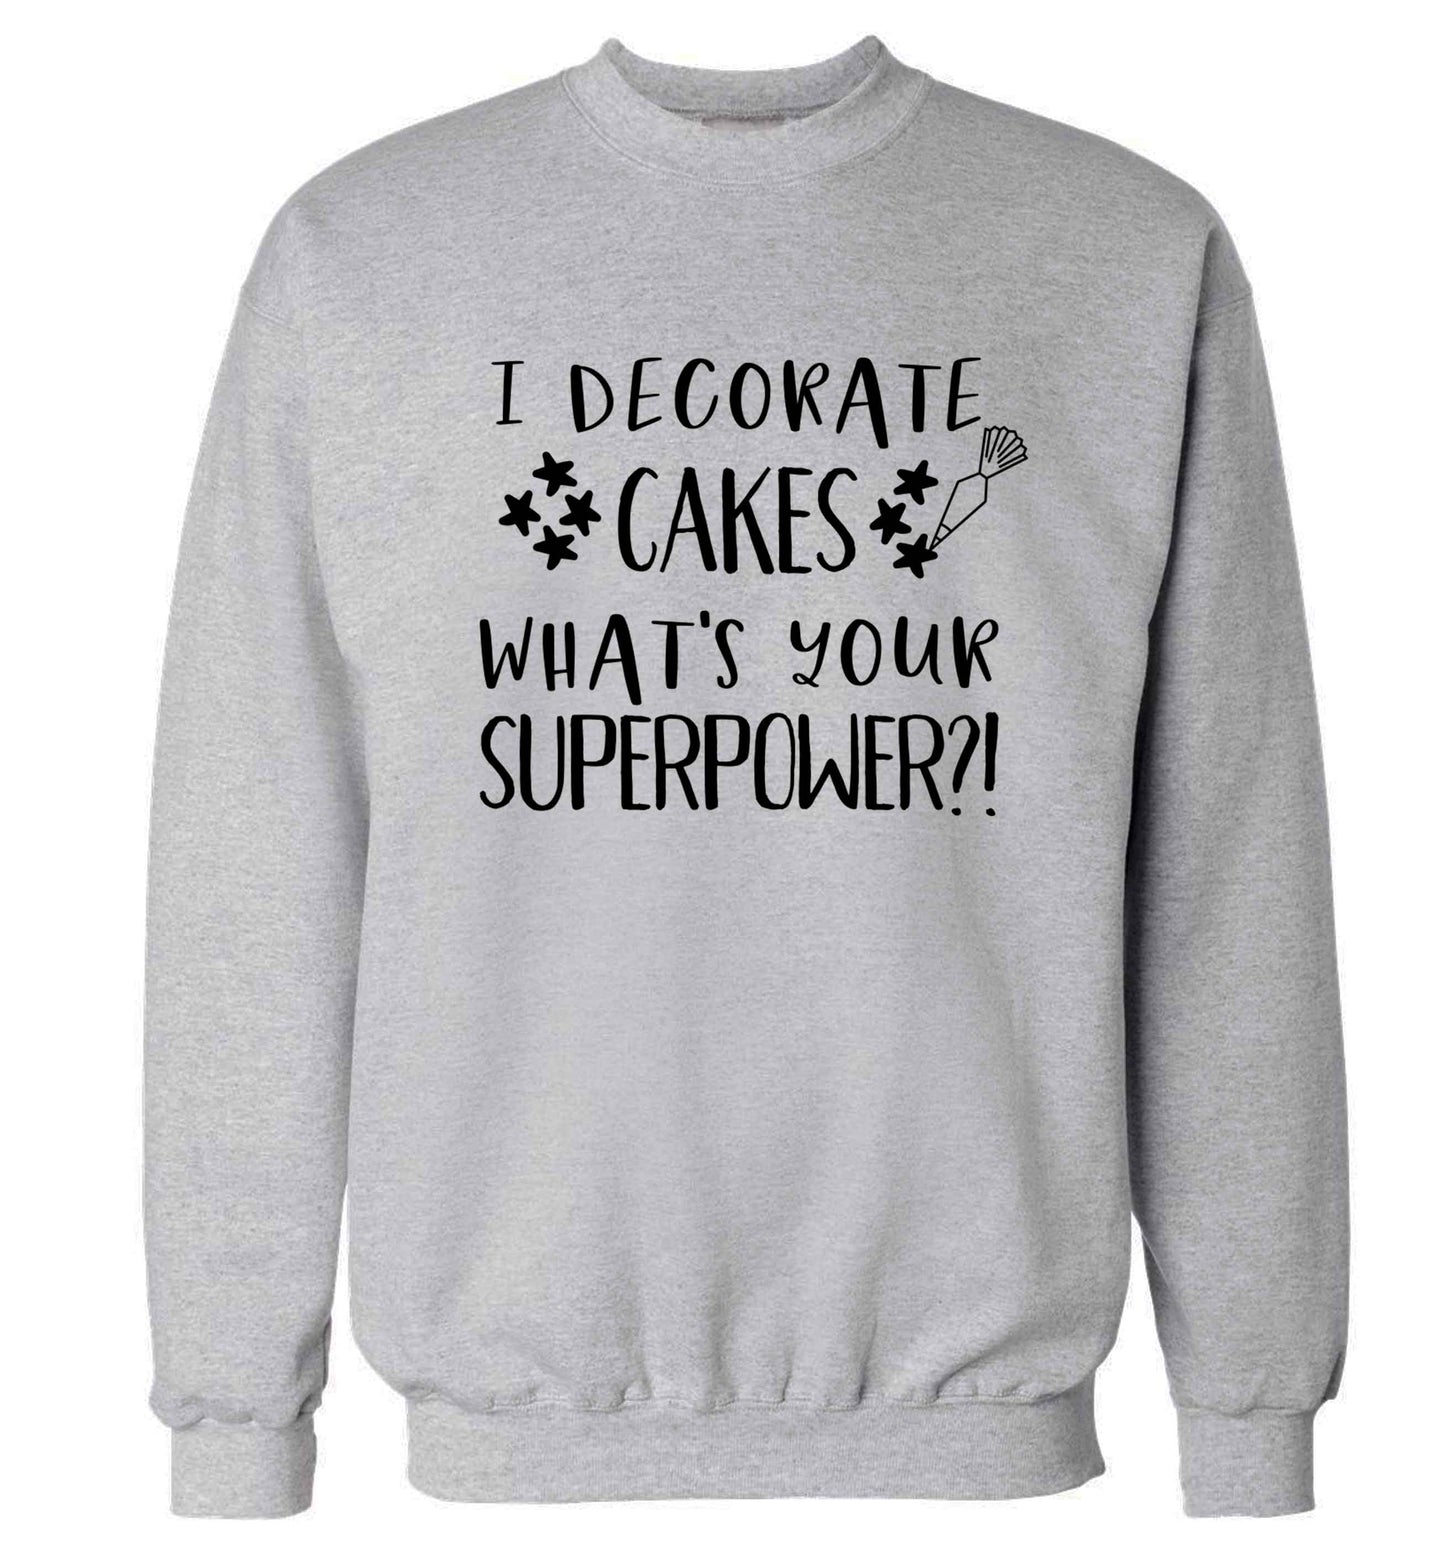 I decorate cakes what's your superpower?! Adult's unisex grey Sweater 2XL